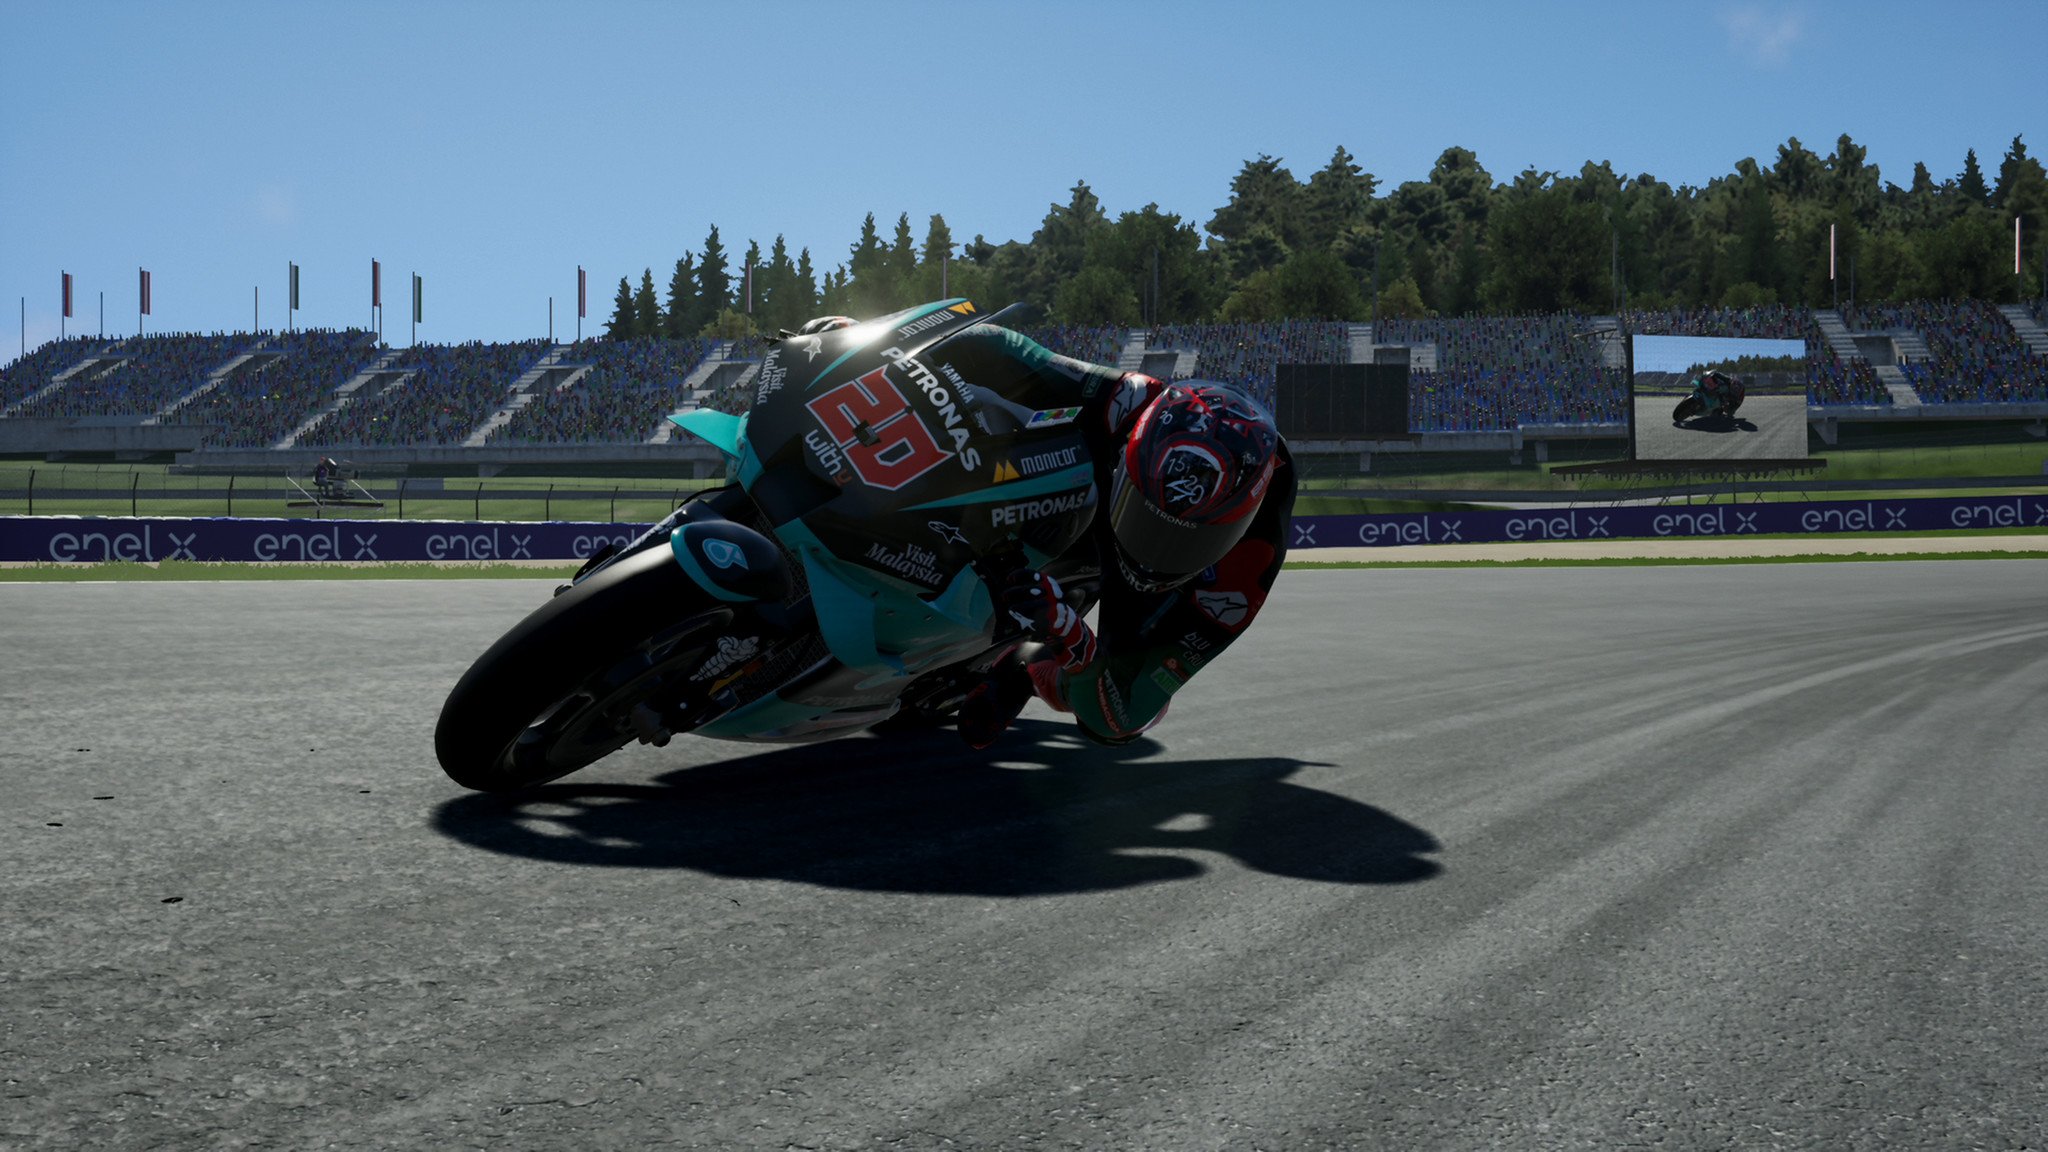 MotoGP 20 A challenging but rewarding two-wheeled racer Windows Central